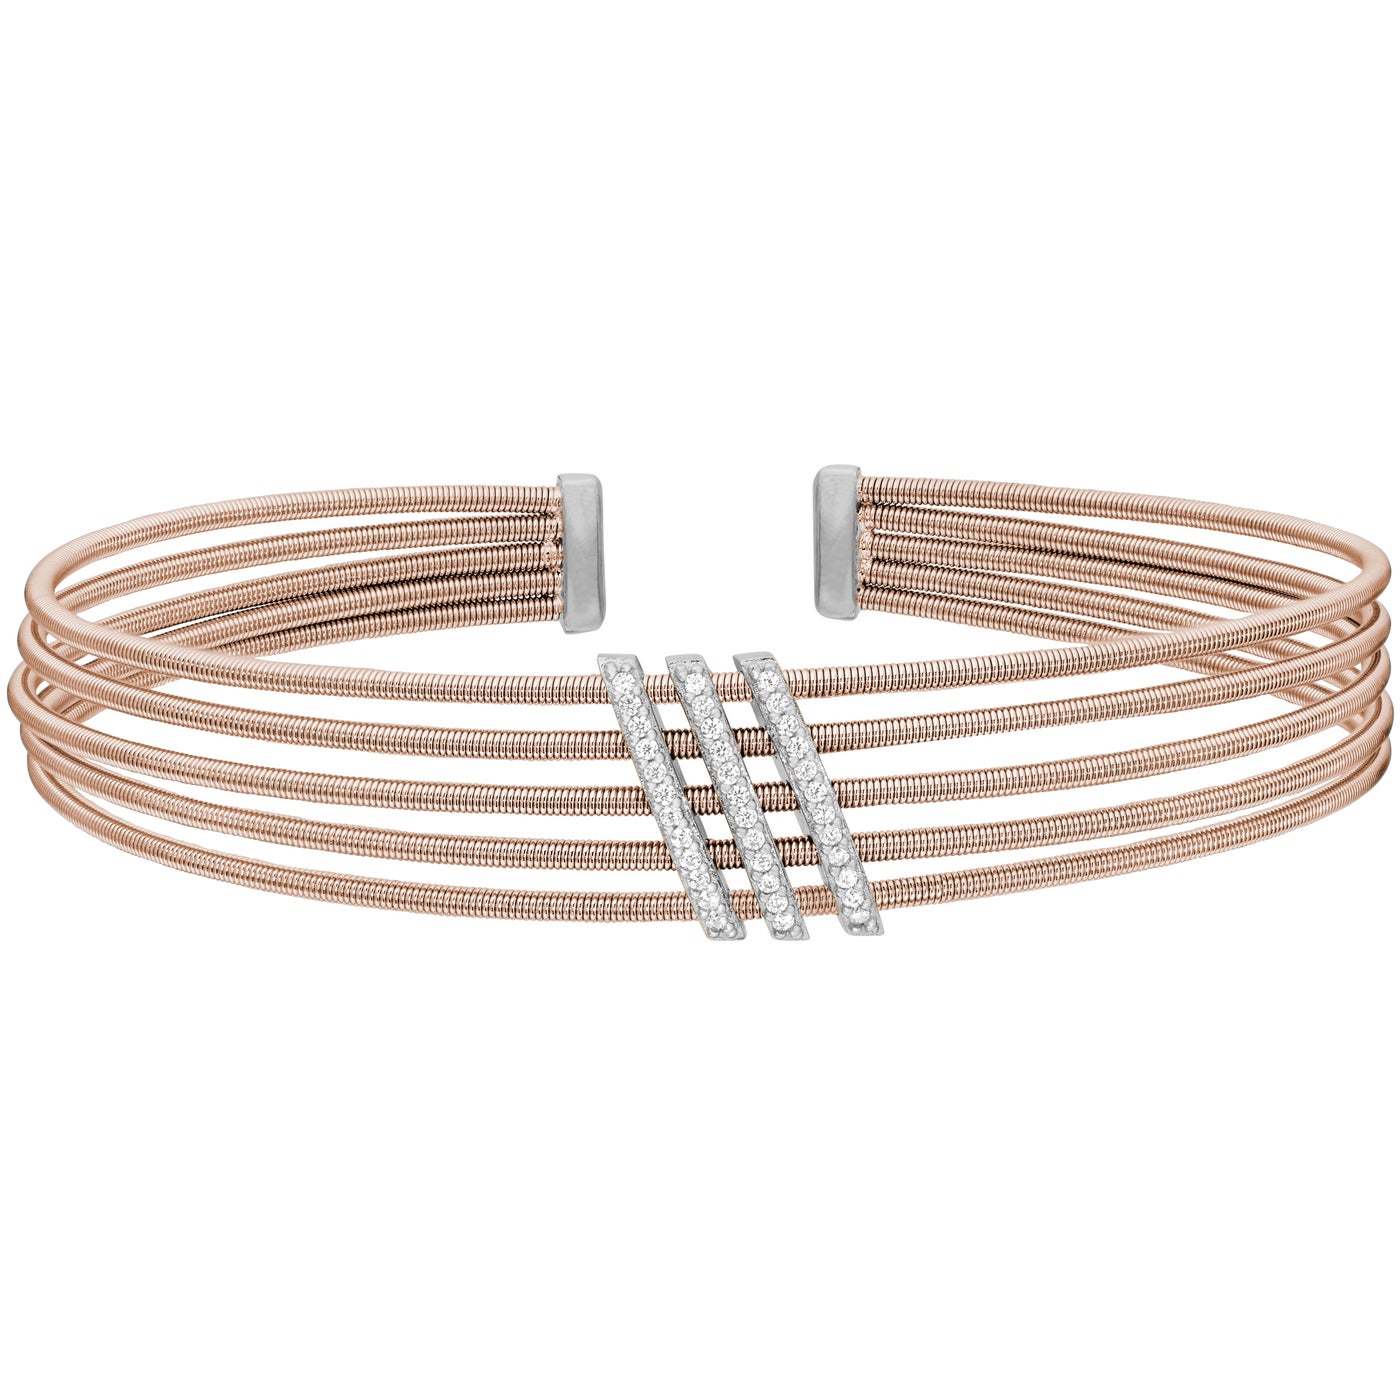 A sterling silver multi cable bracelet with three diagonal bars of simulated diamonds displayed on a neutral white background.